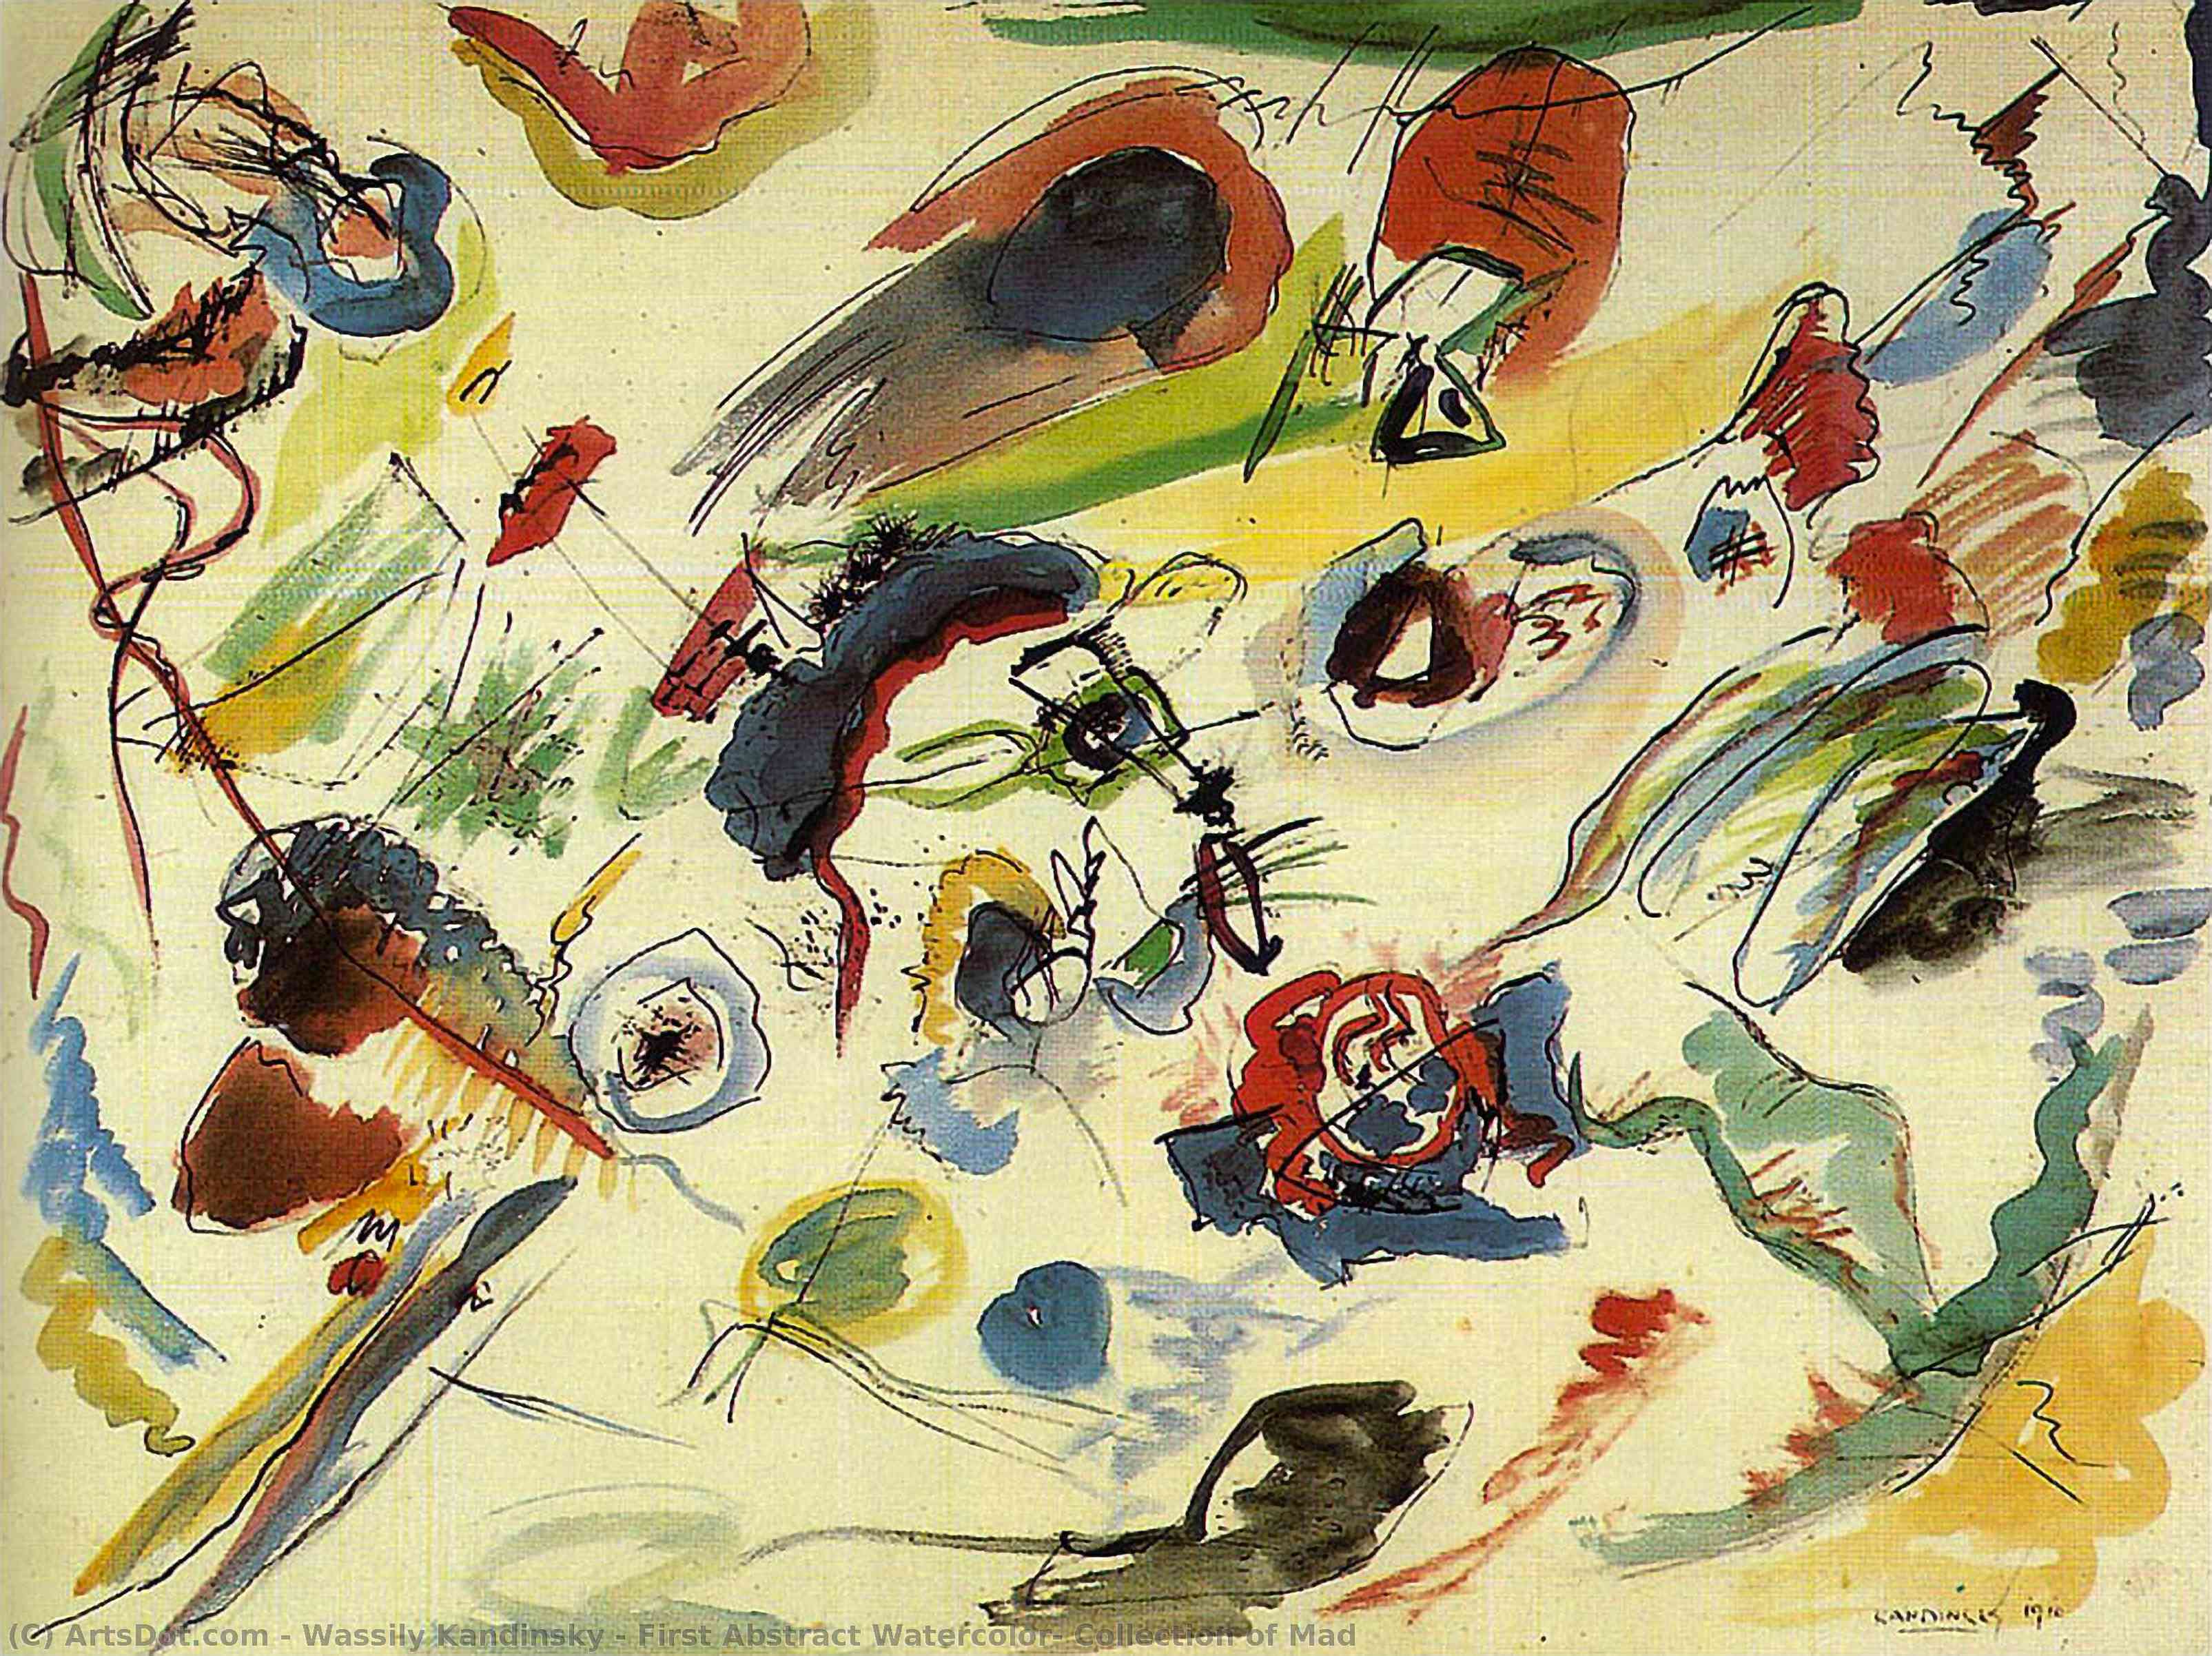 Buy Museum Art Reproductions First Abstract Watercolor, Collection of Mad, 1910 by Wassily Kandinsky (1866-1944, Russia) | ArtsDot.com